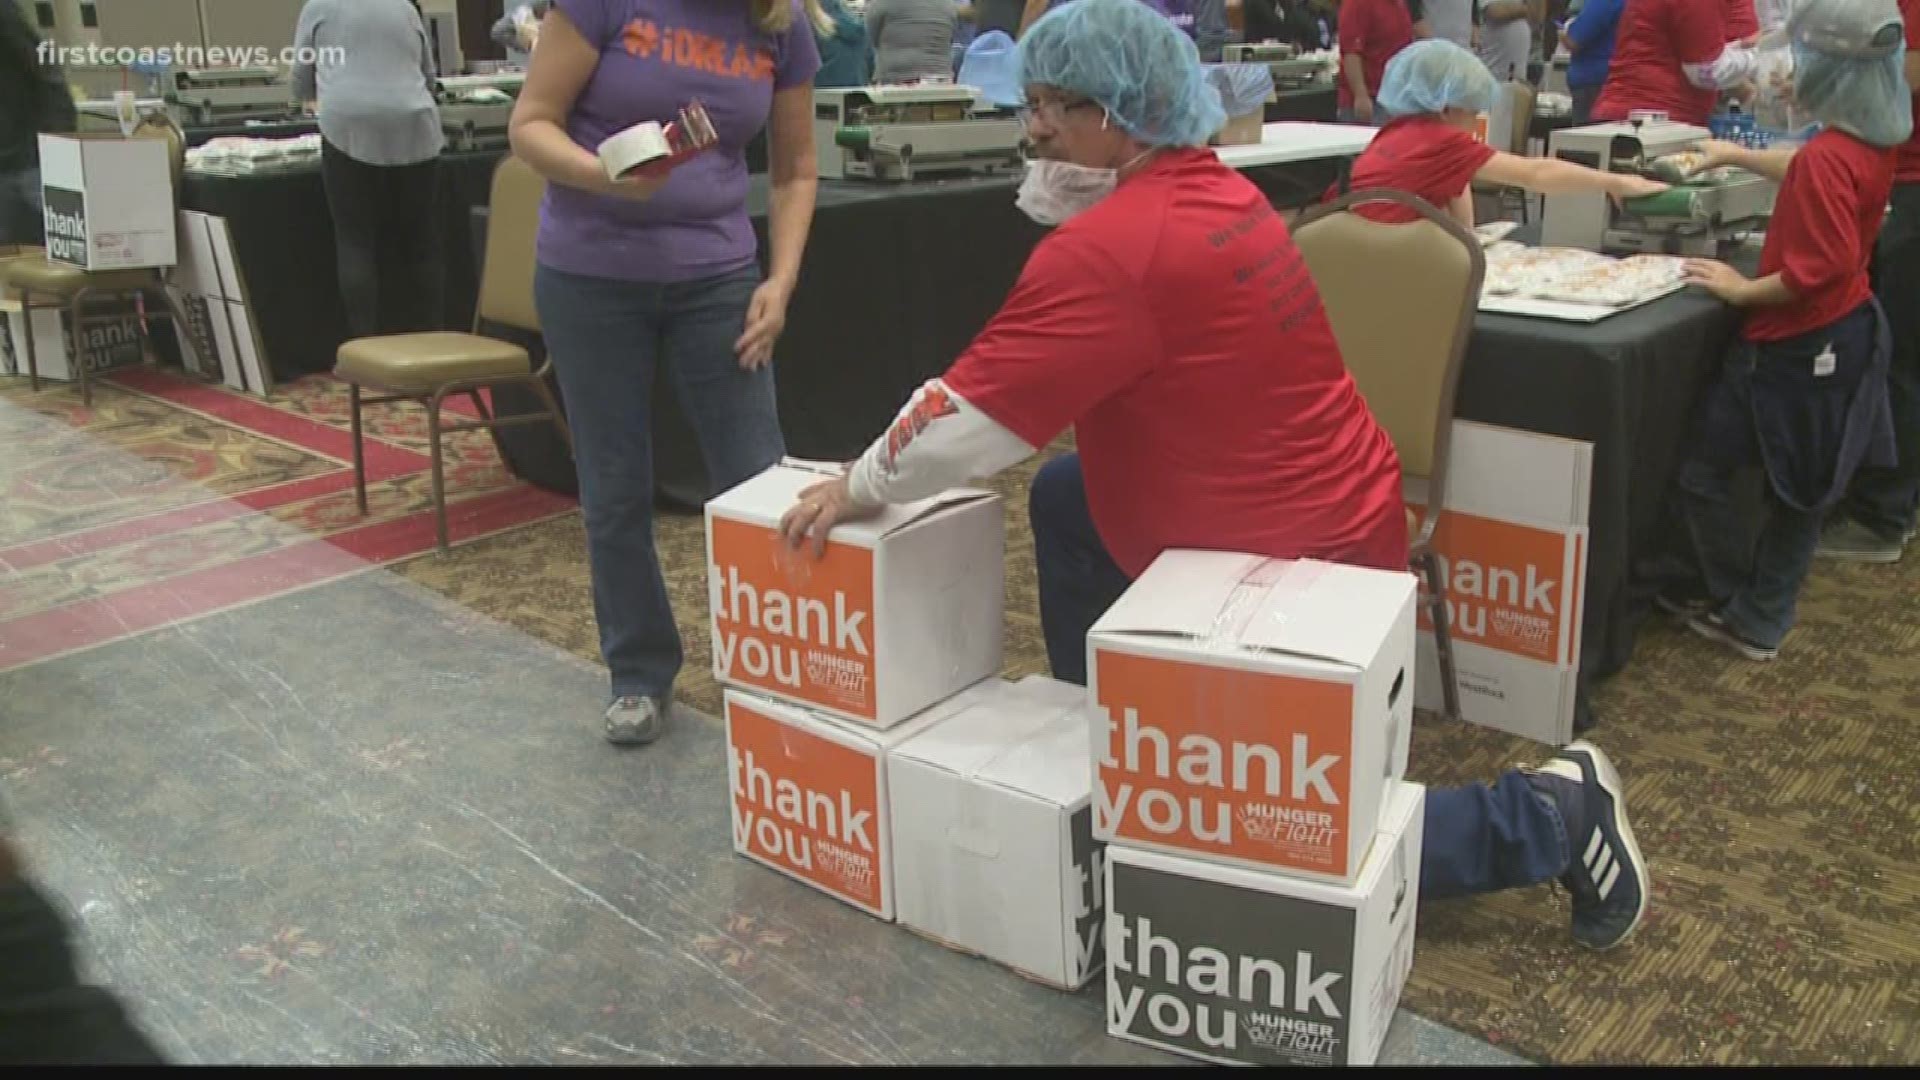 Across the First Coast, thousands of volunteers gave their time to feed others as the holidays approach.